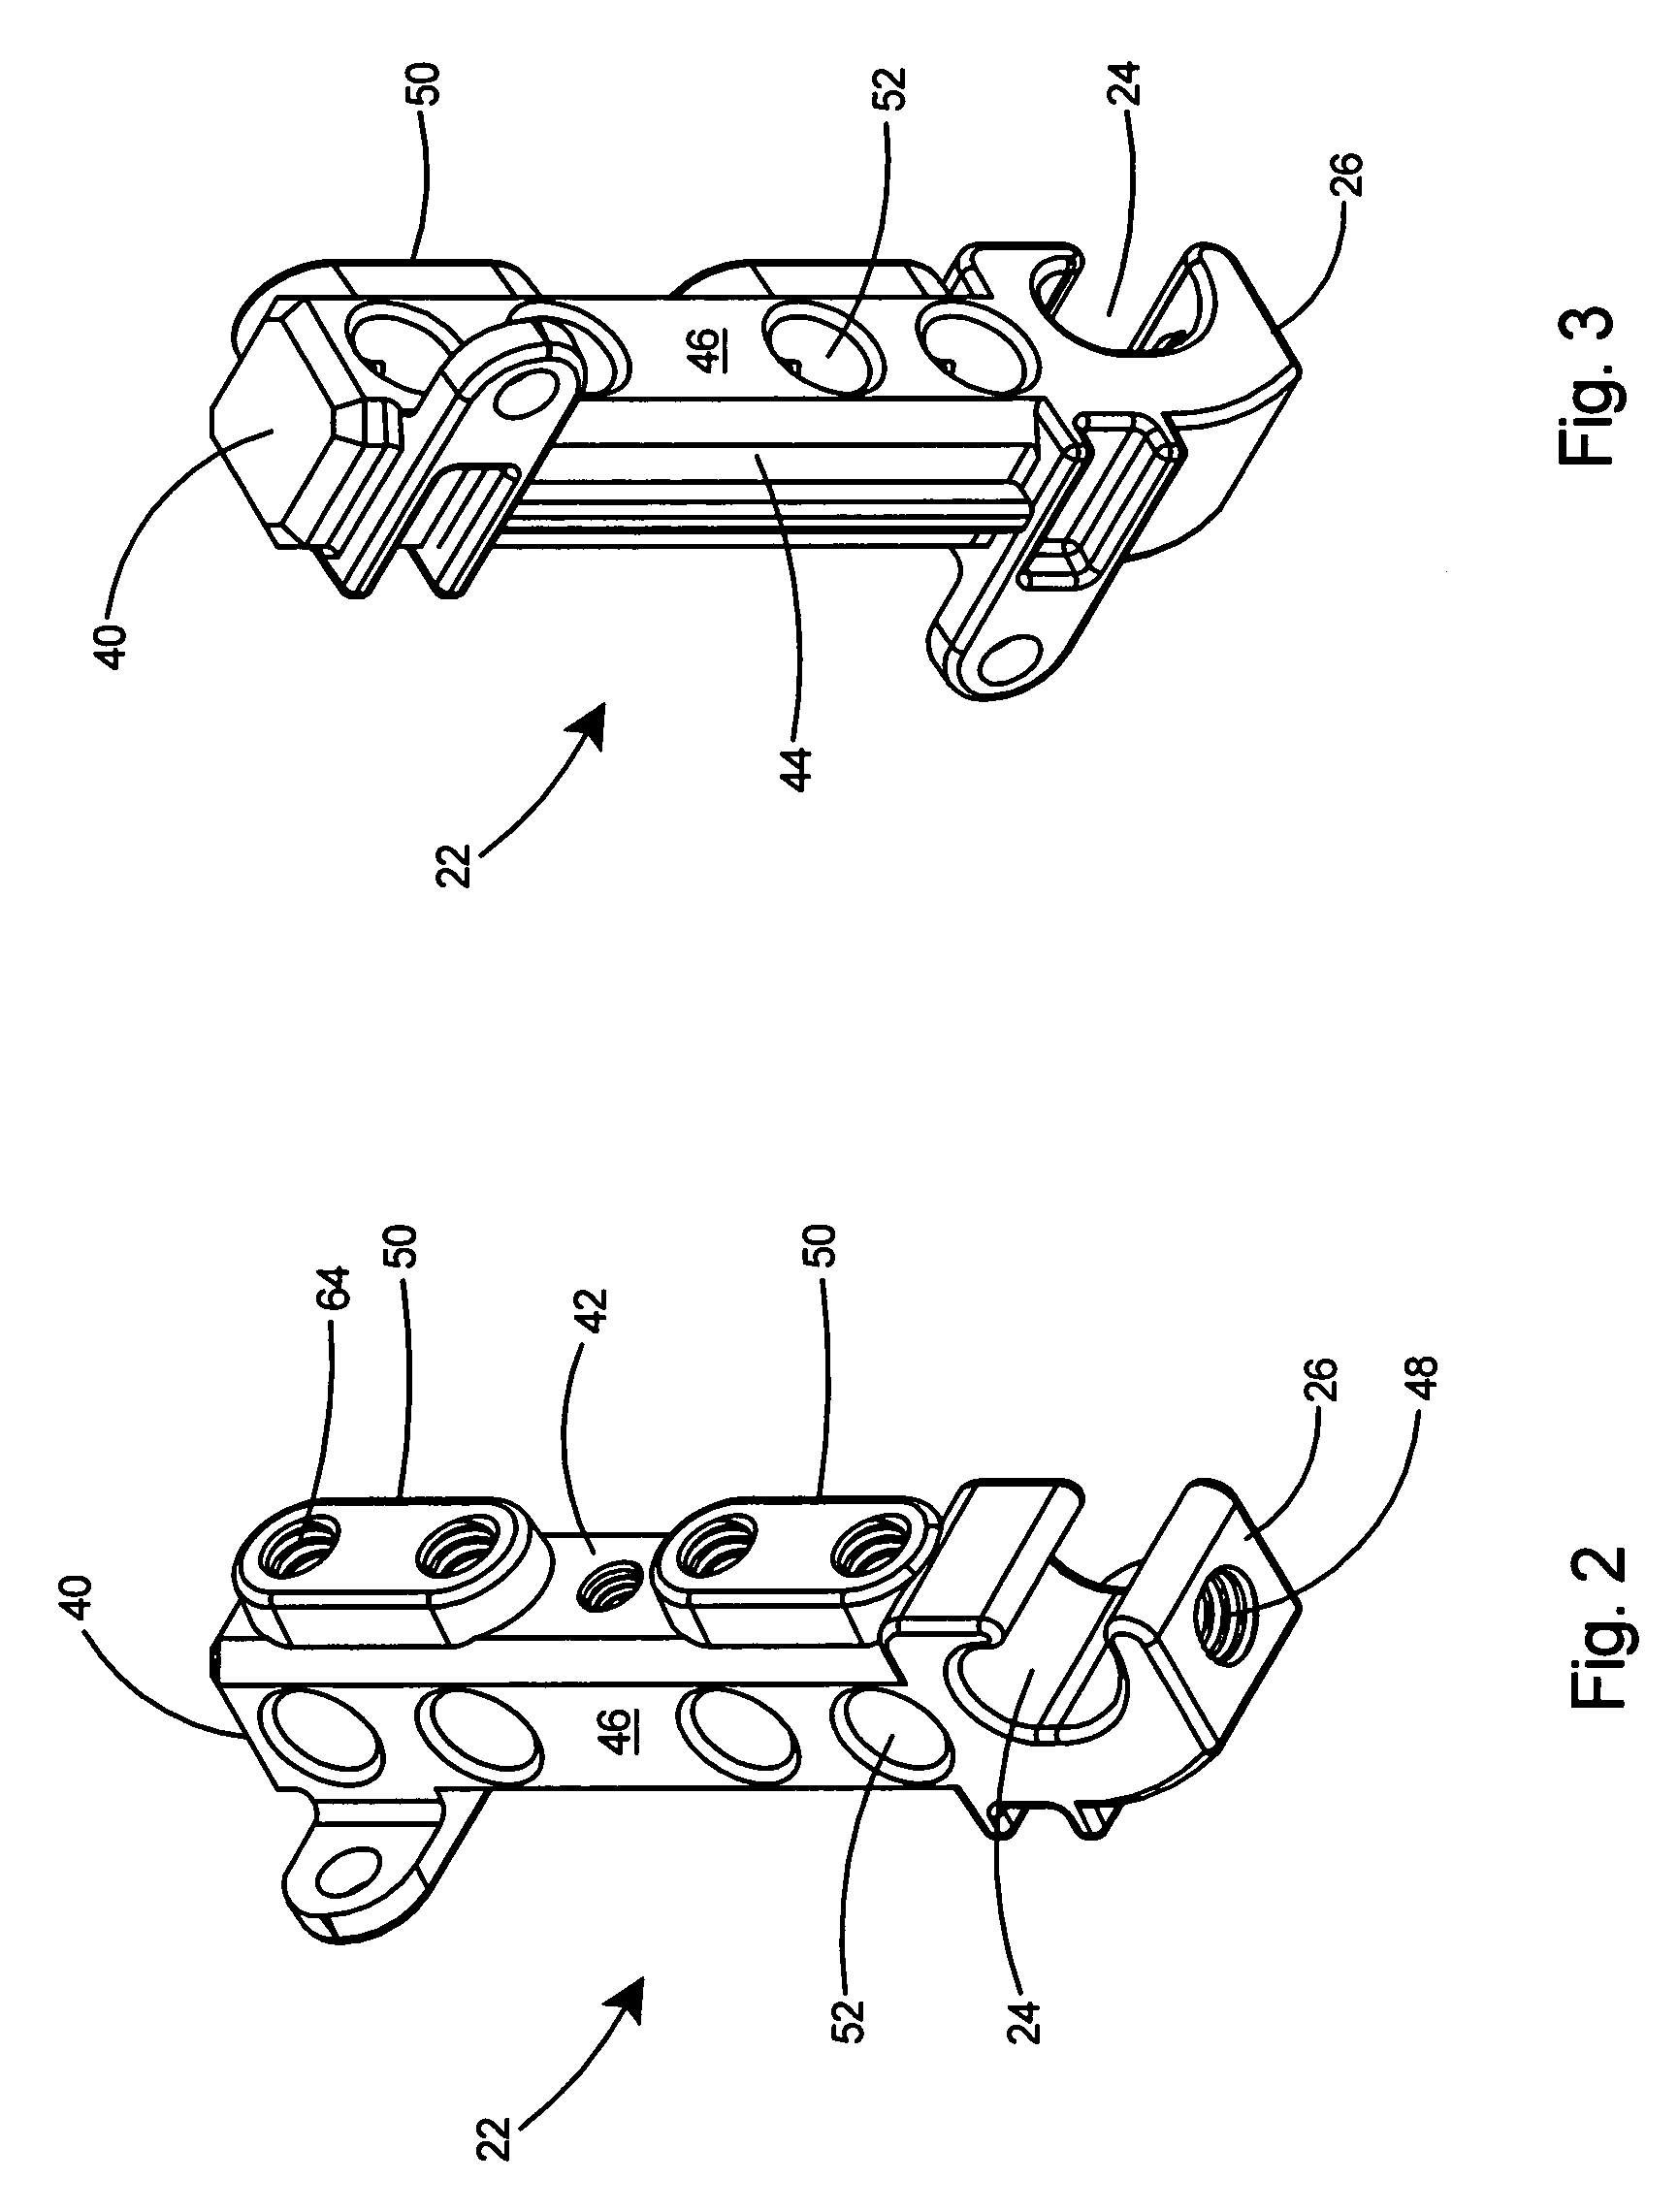 Grounding terminal block assembly including conduit adapter for multiple services